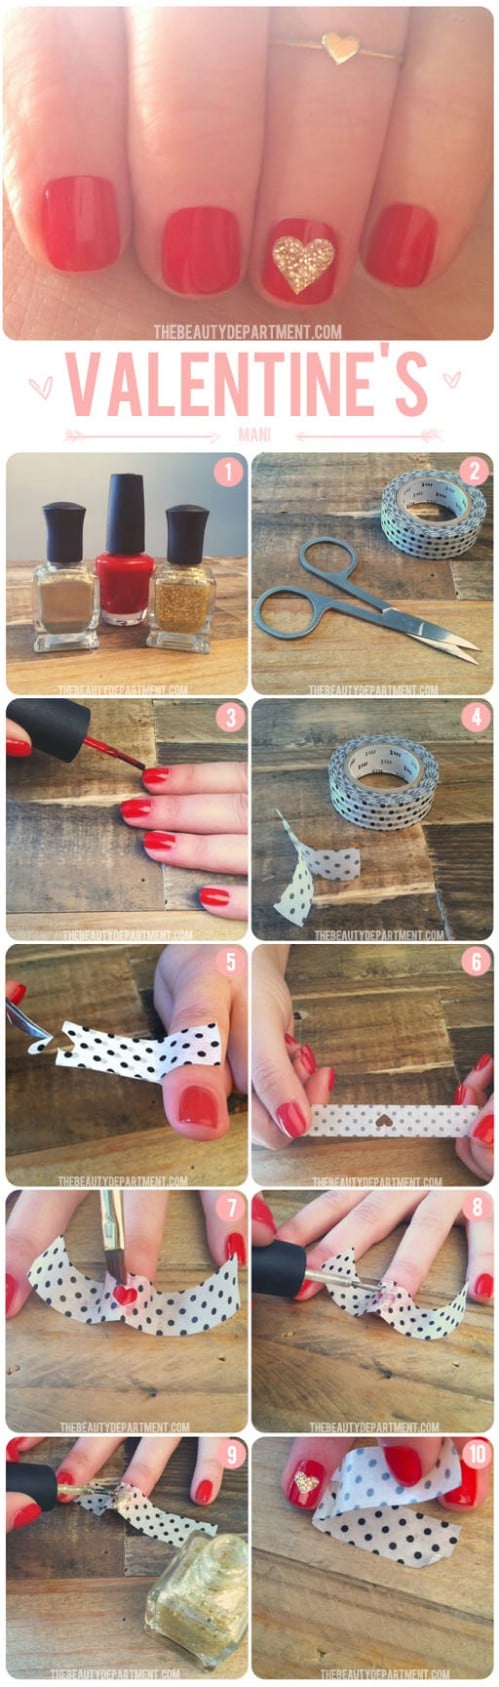 Simple Heart - 20 Ridiculously Cute Valentine’s Day Nail Art Designs